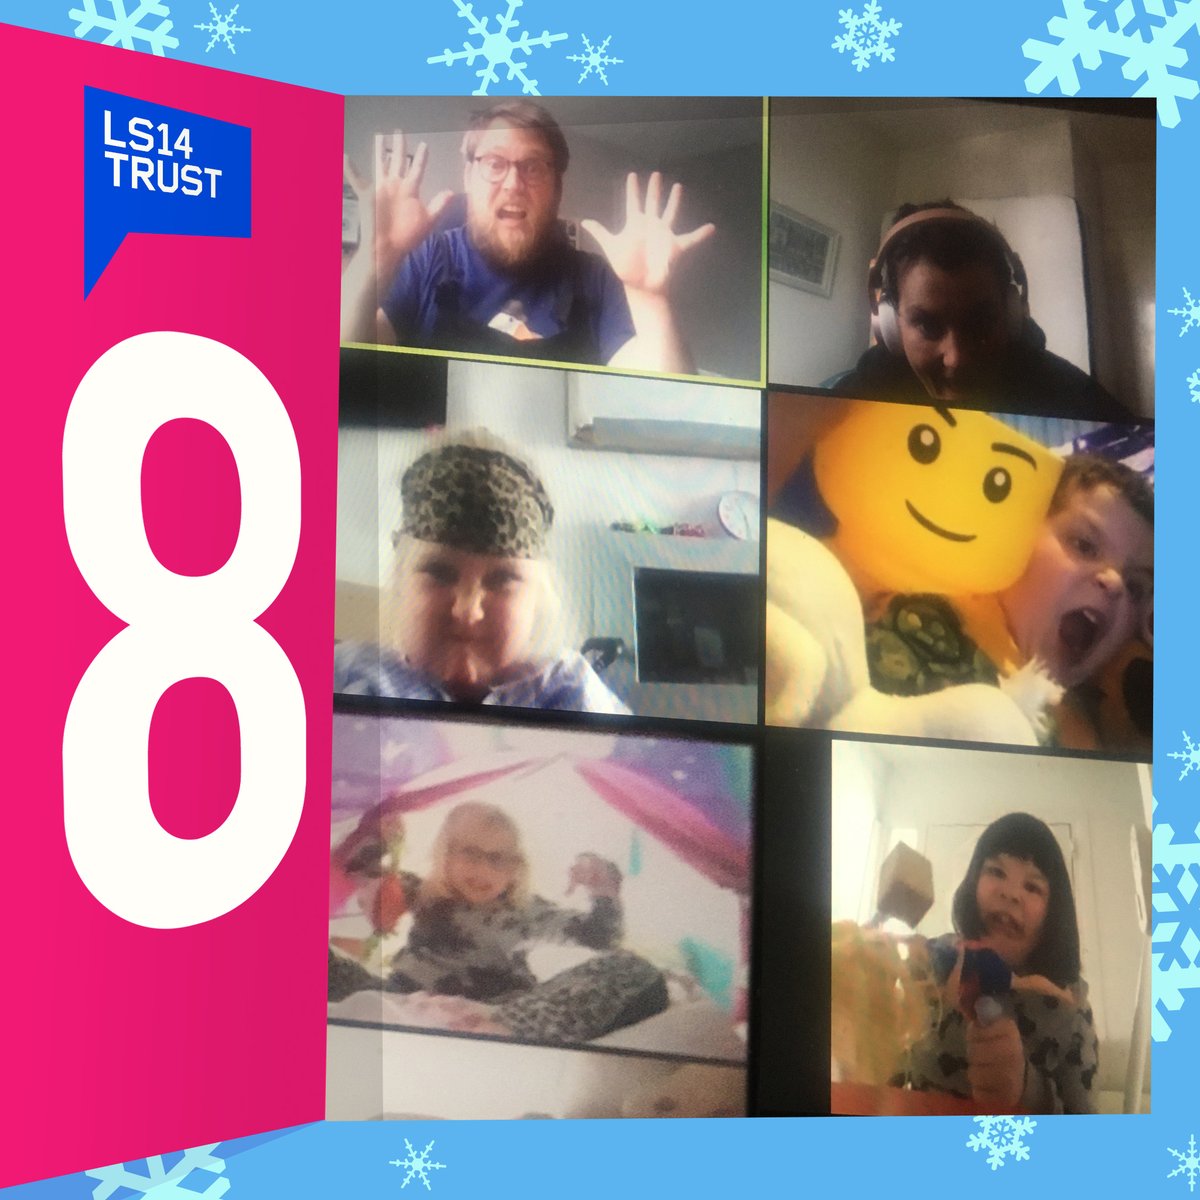 This has been a year when we have had fun virtually all of the time.... @miniplaybox @PlayfulLeed @ActiveLeeds @Child_Leeds #seacroftstayactive #lockdownplay #adventcalendar